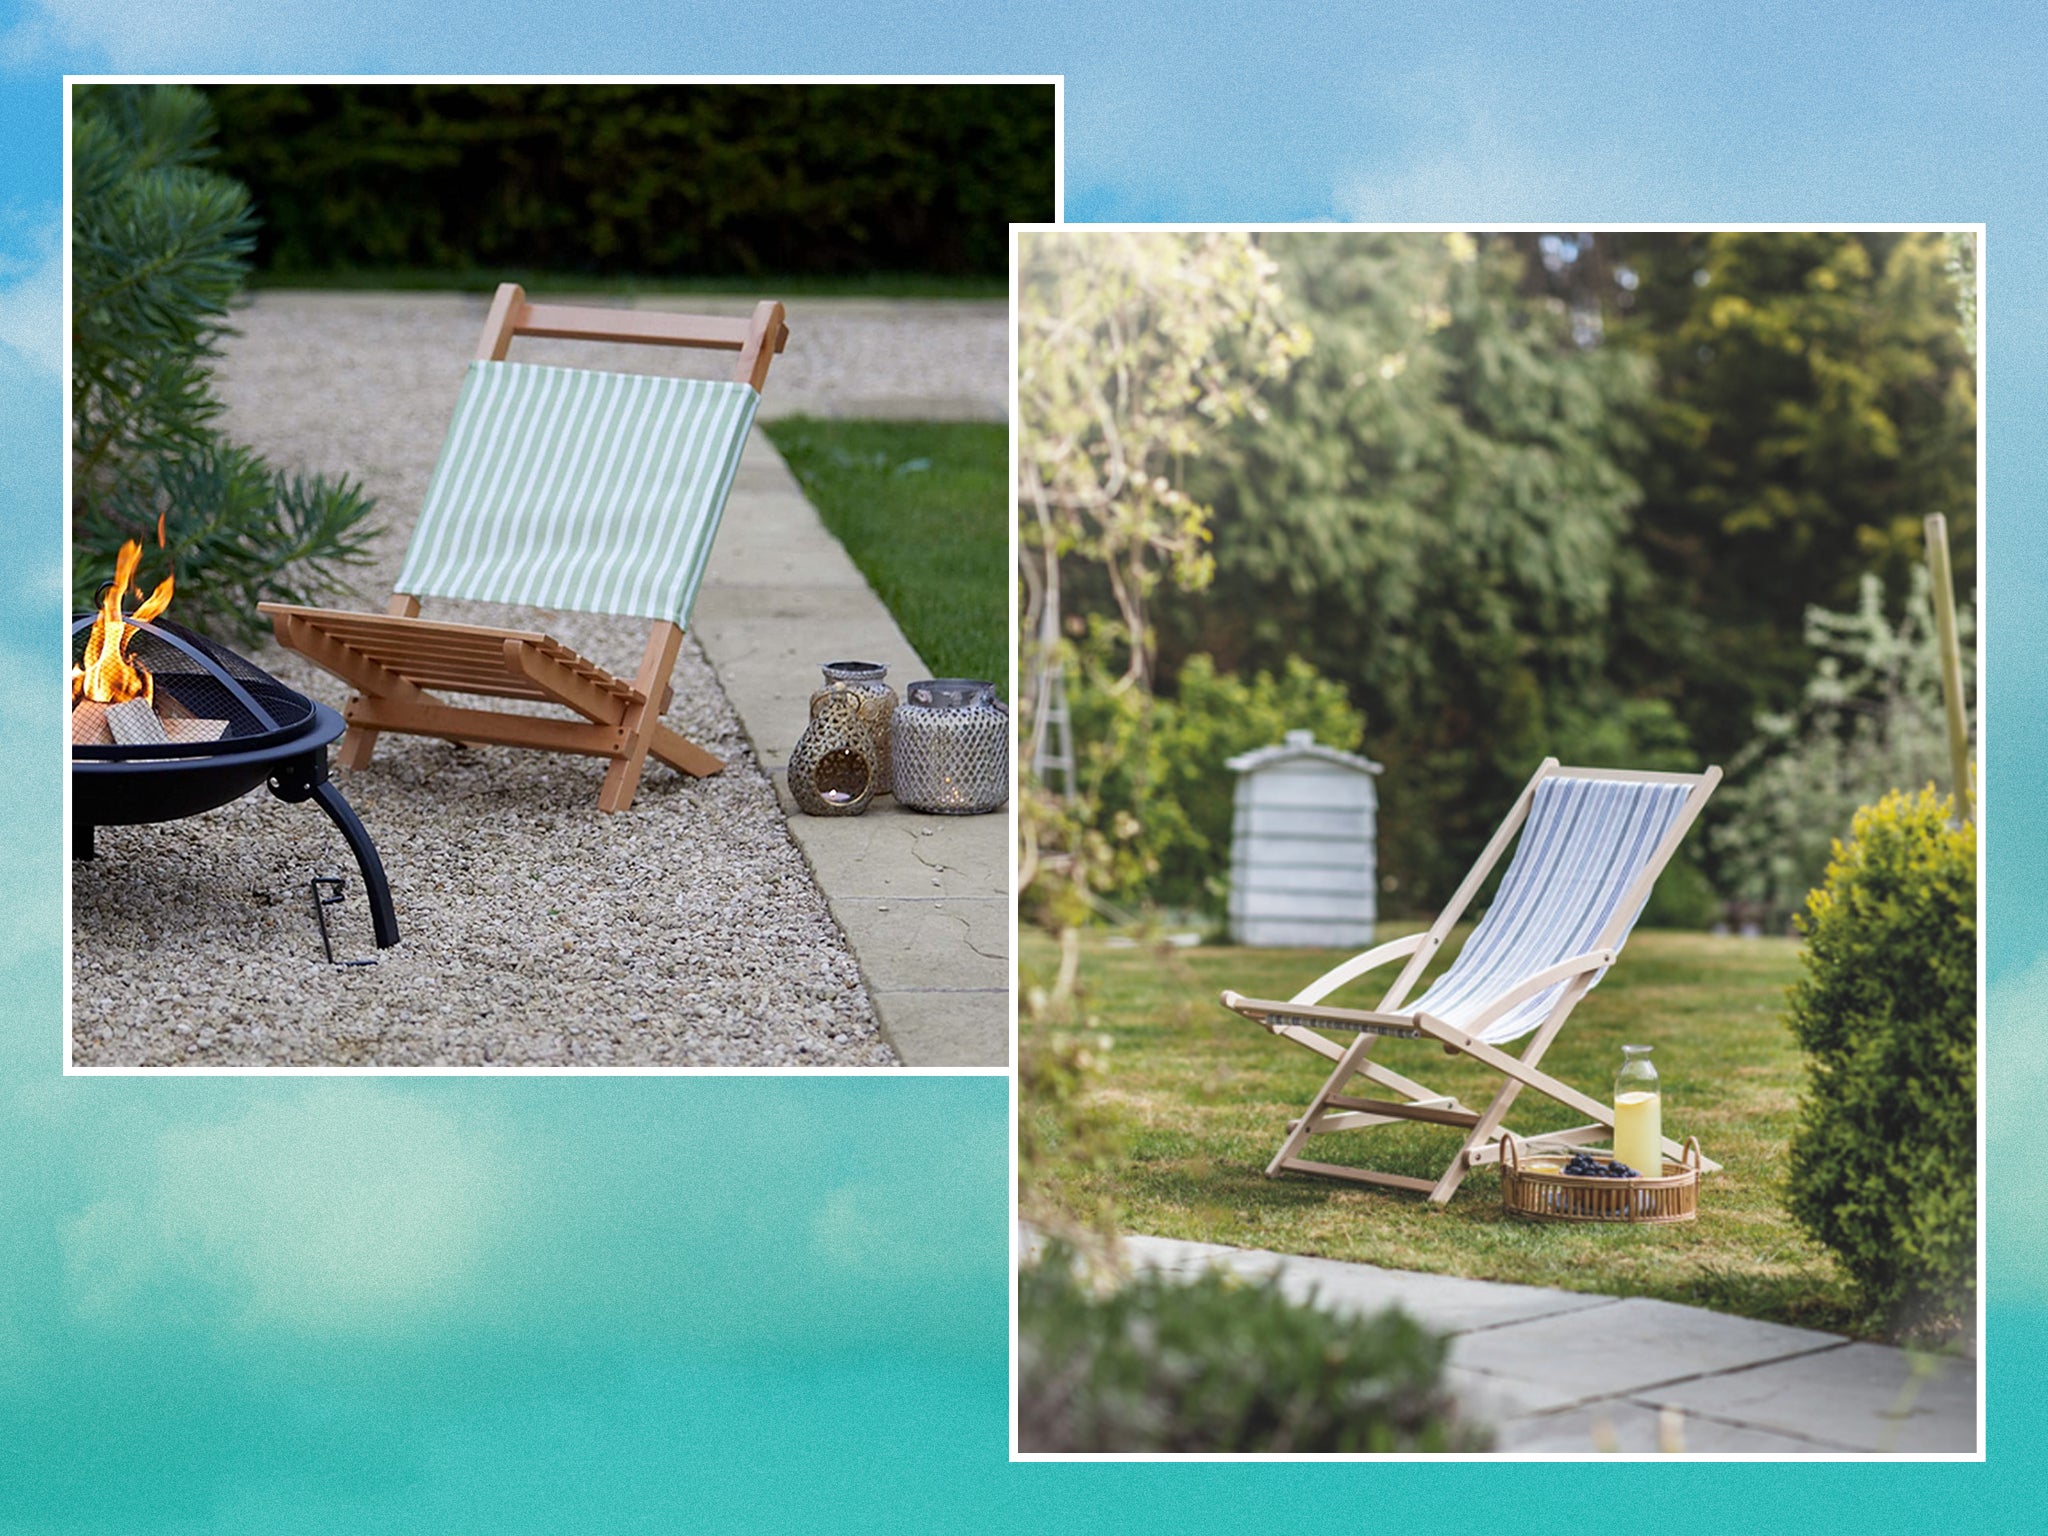 These durable, cool recliners are perfect for summertime lazing in the garden or packing for the beach